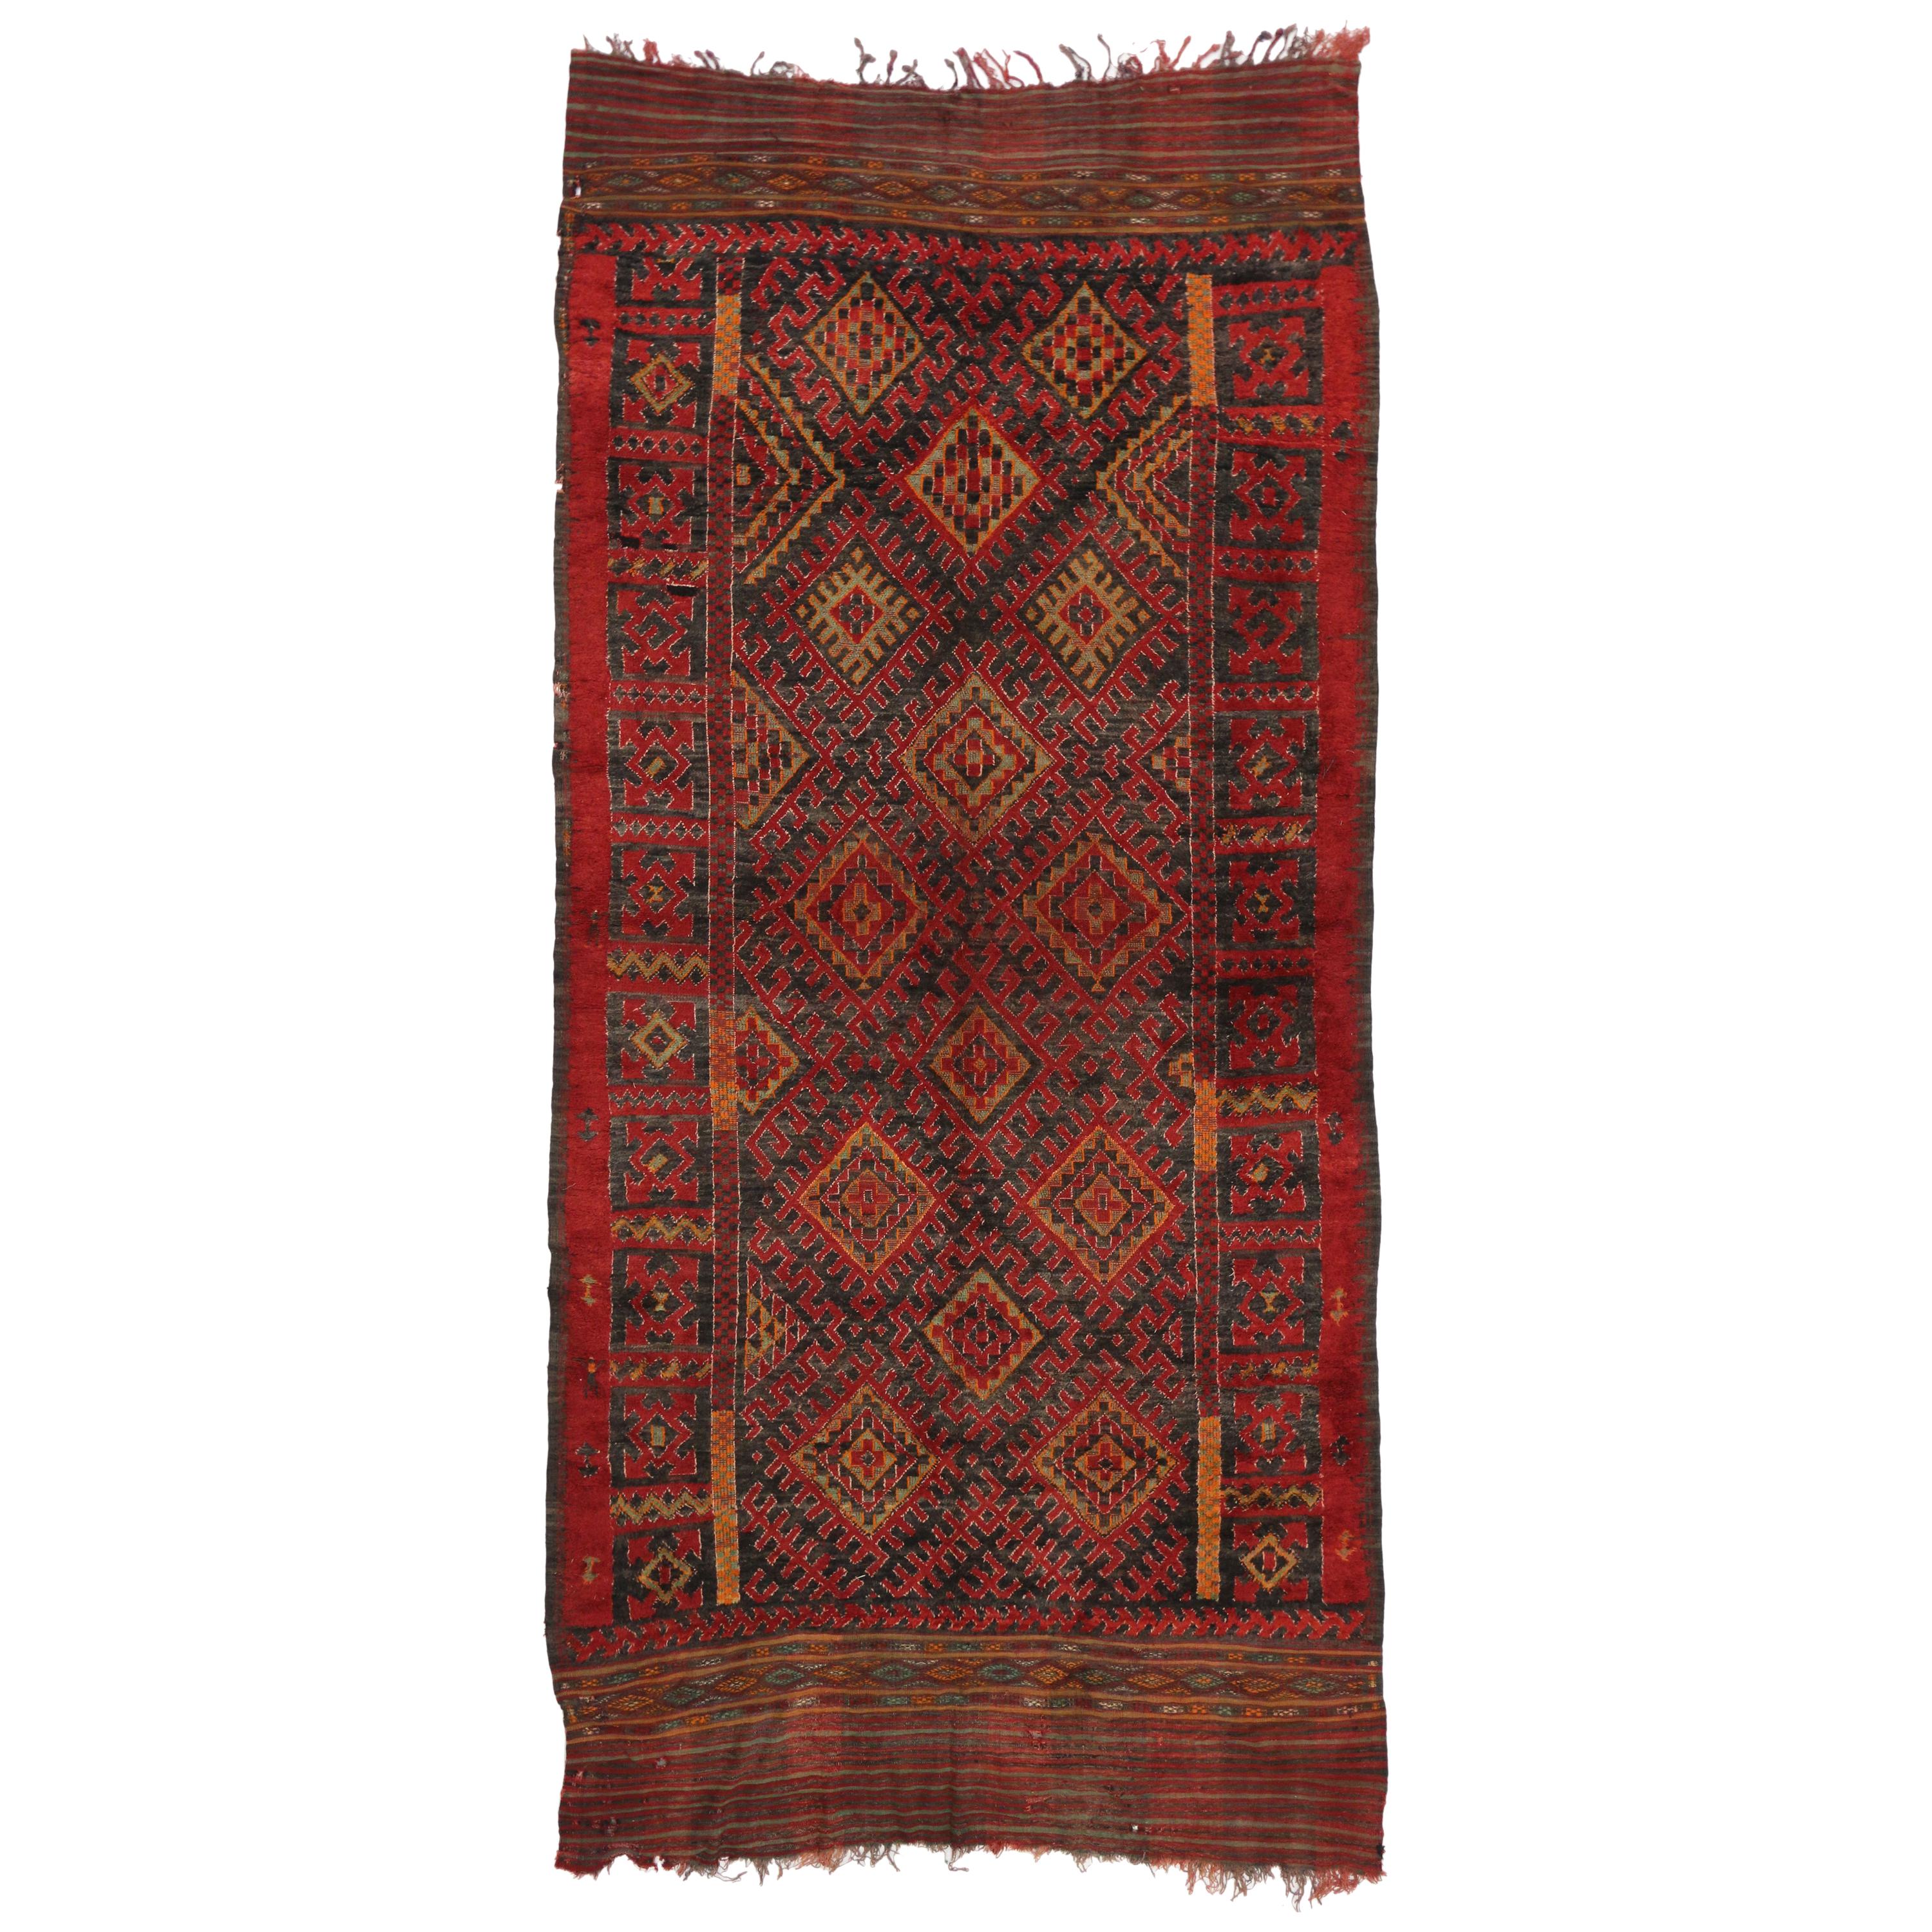 Vintage Berber Moroccan Long Rug with Tribal Style, Berber Moroccan Carpet